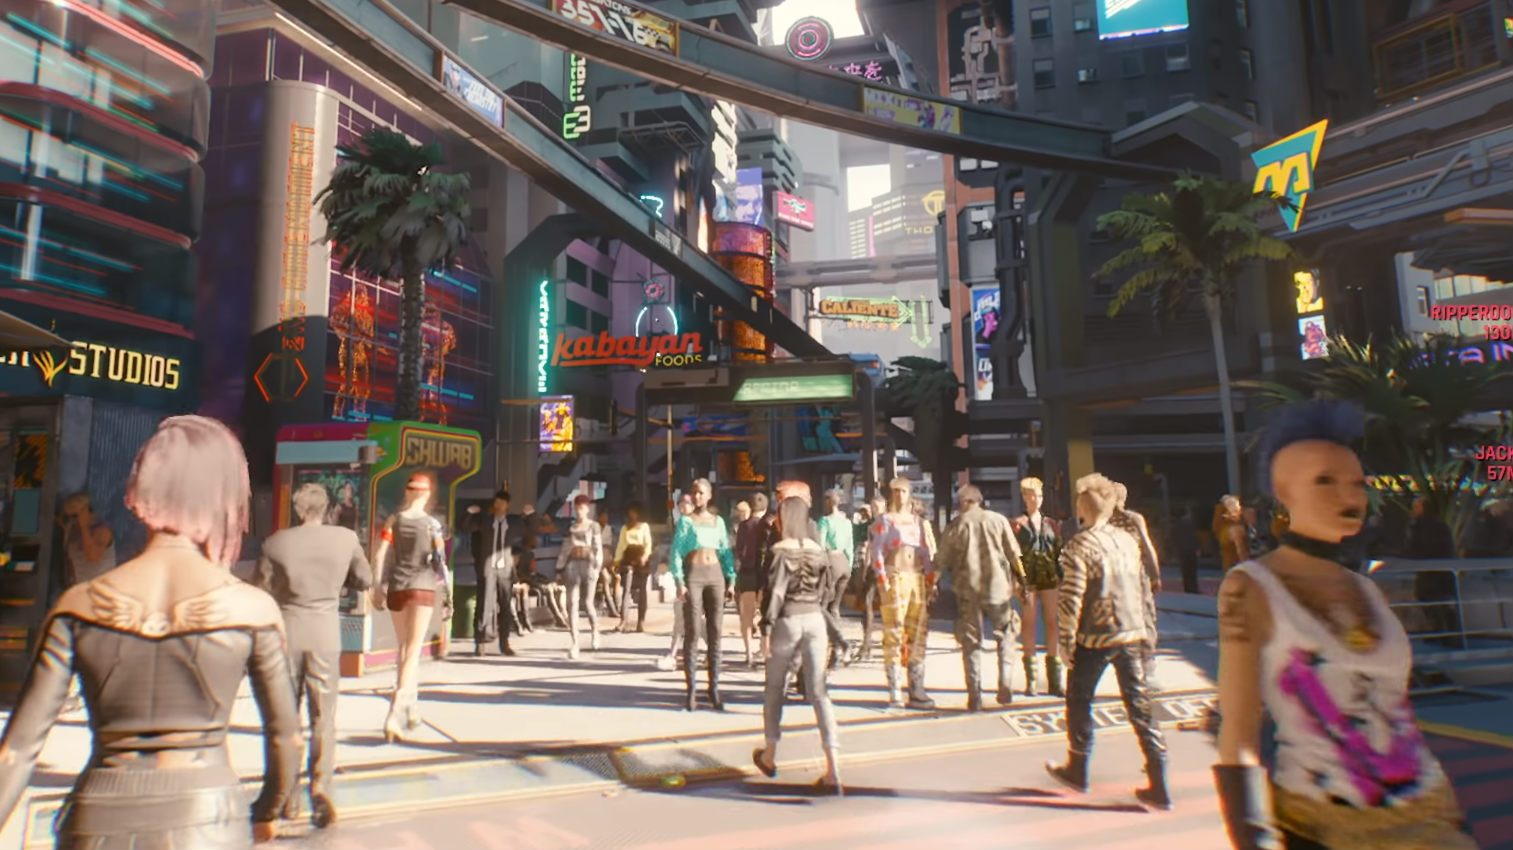 4 highlights from the ‘Cyberpunk 2077’ gameplay reveal